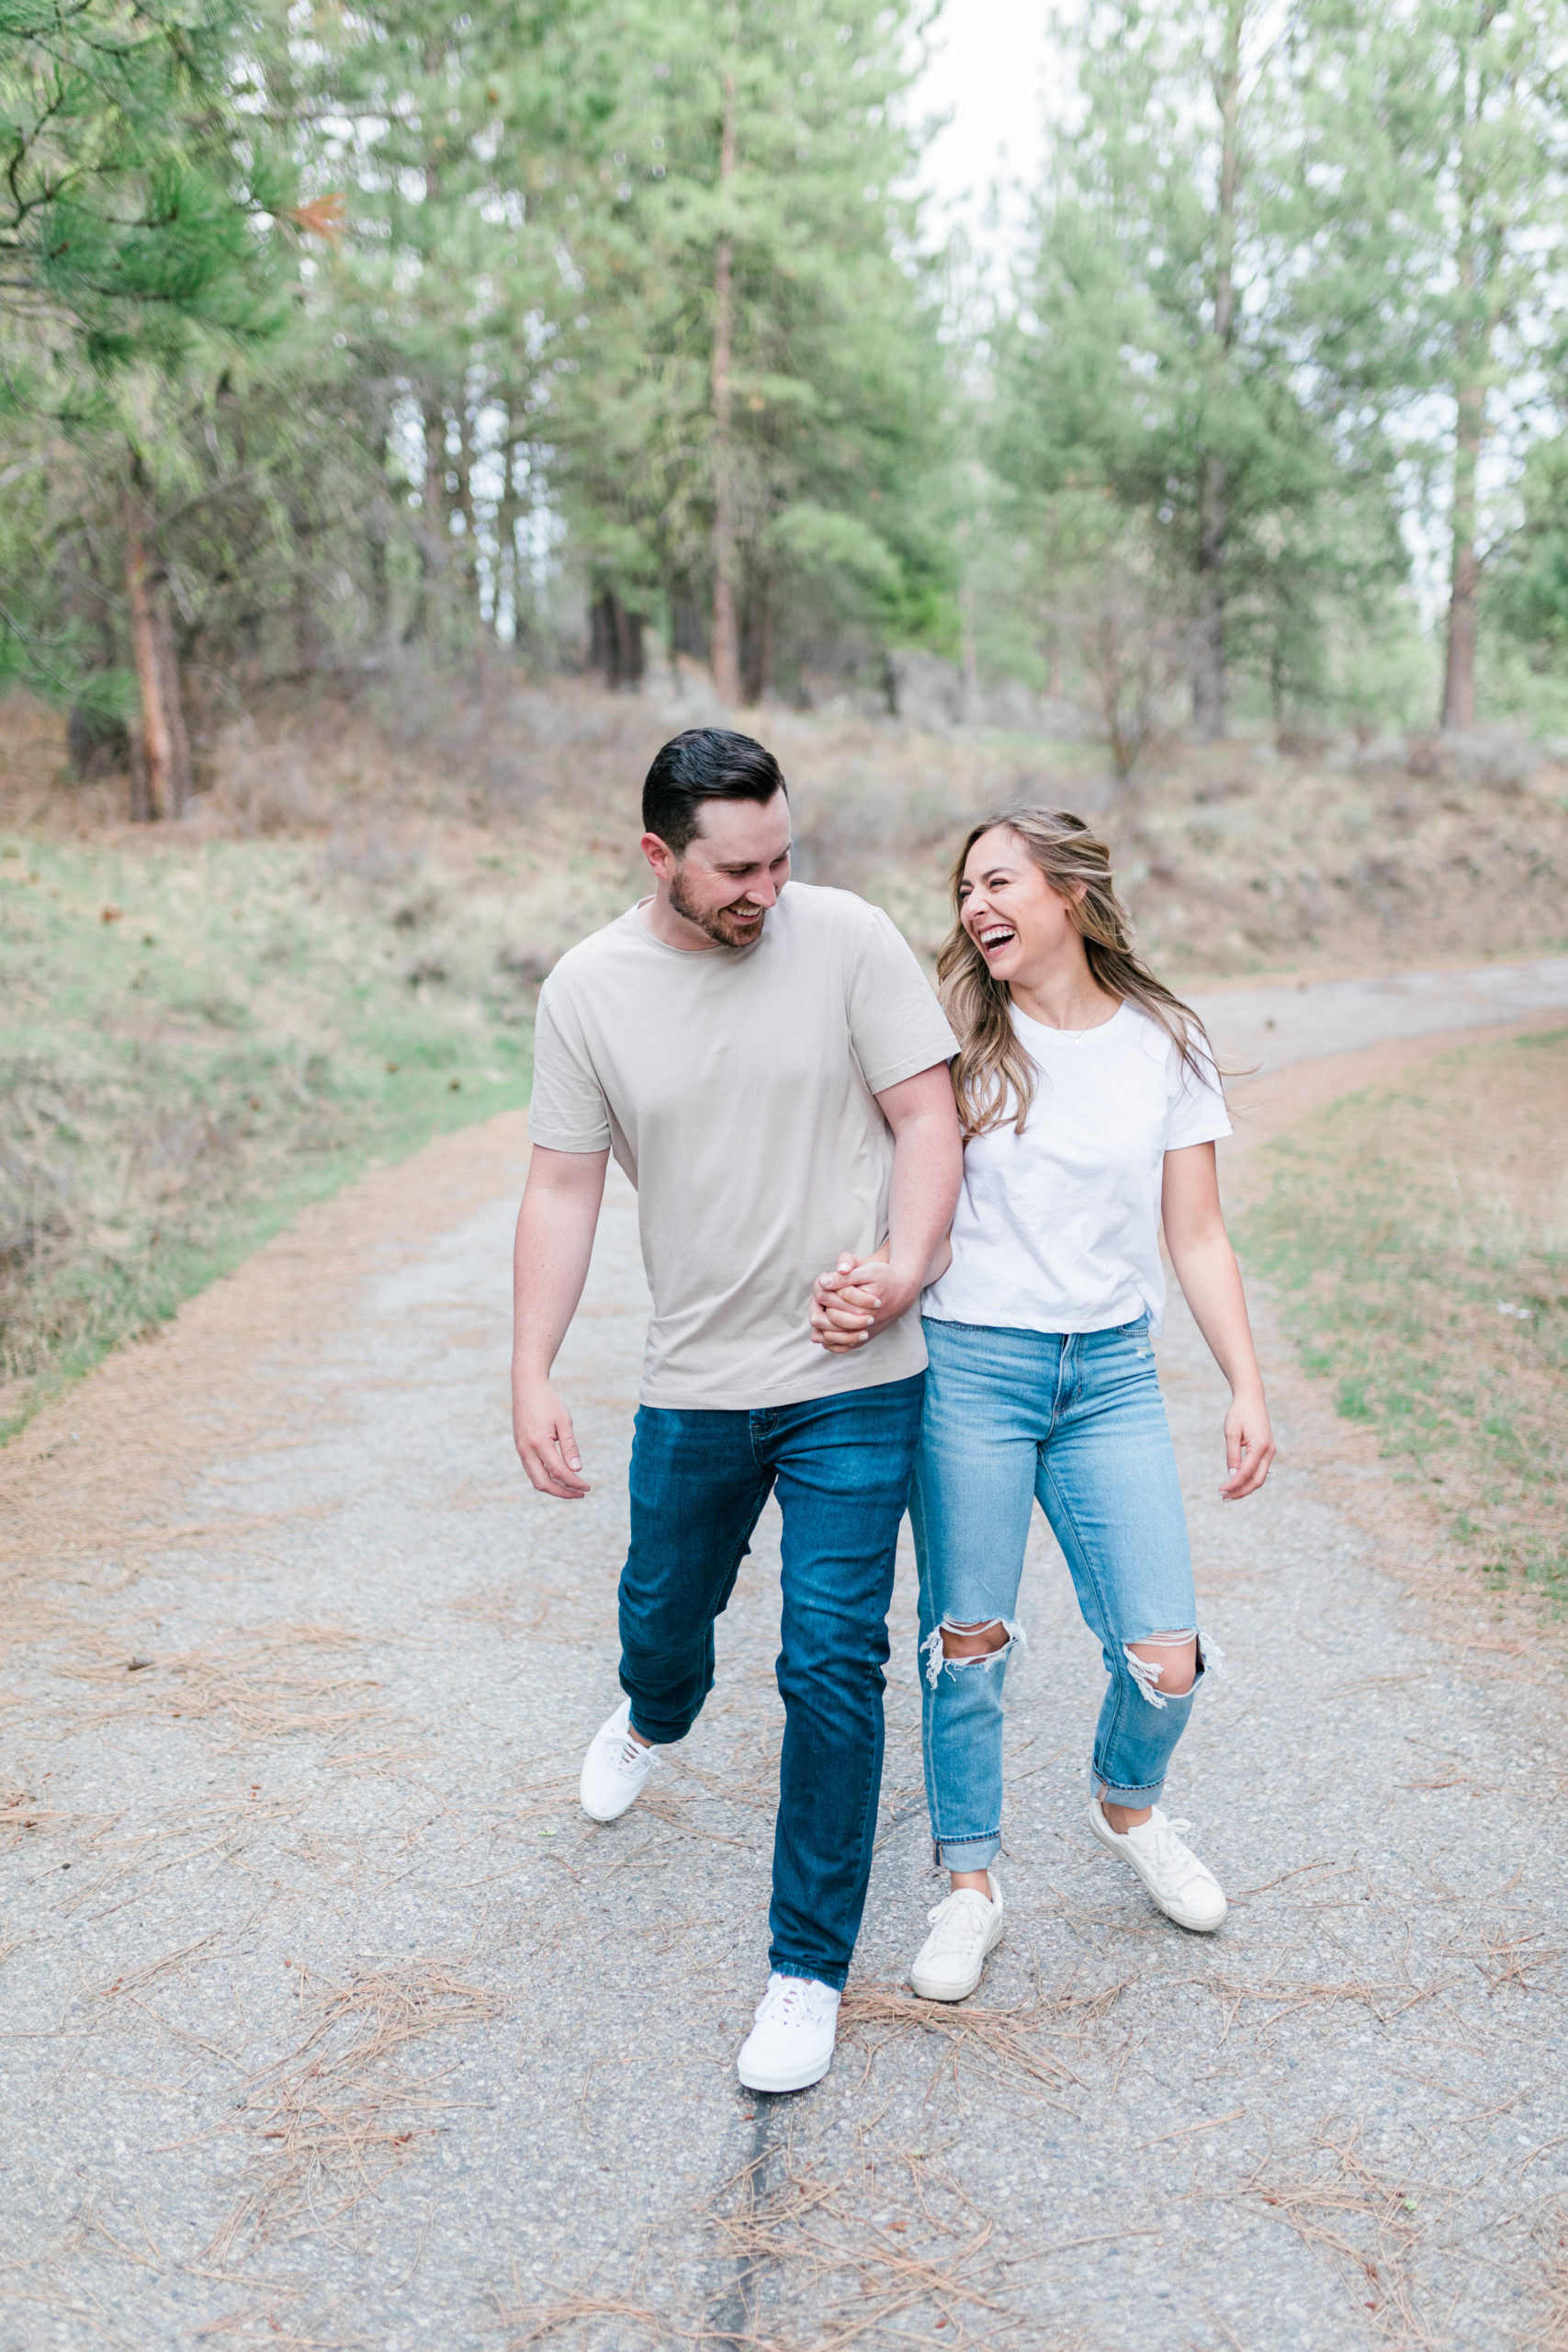 man and woman holding hands and walking down a dirt path as they bump their hips together